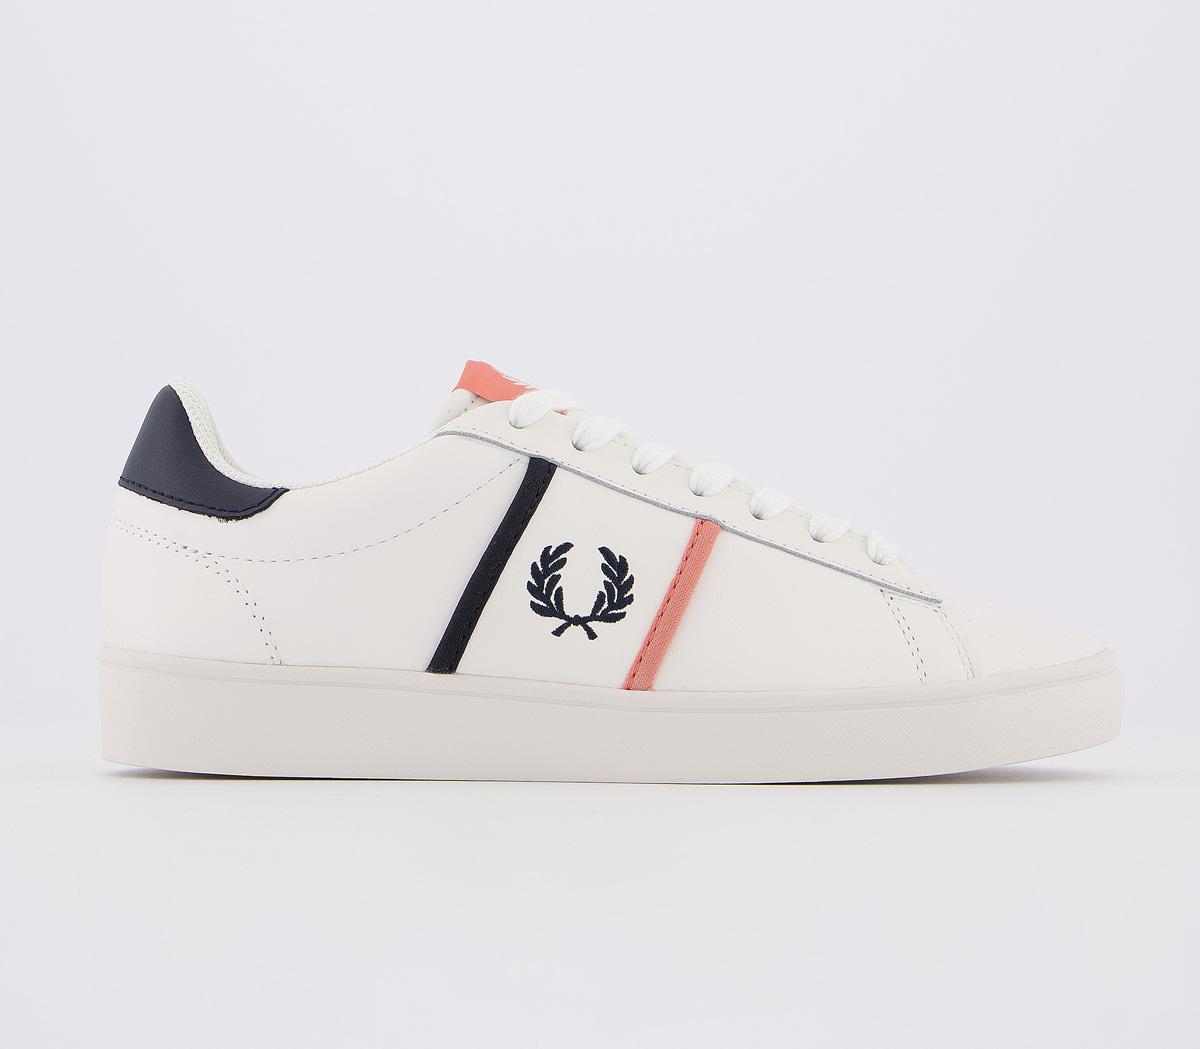 Fred PerrySpencer TrainersSnow White Peach Navy